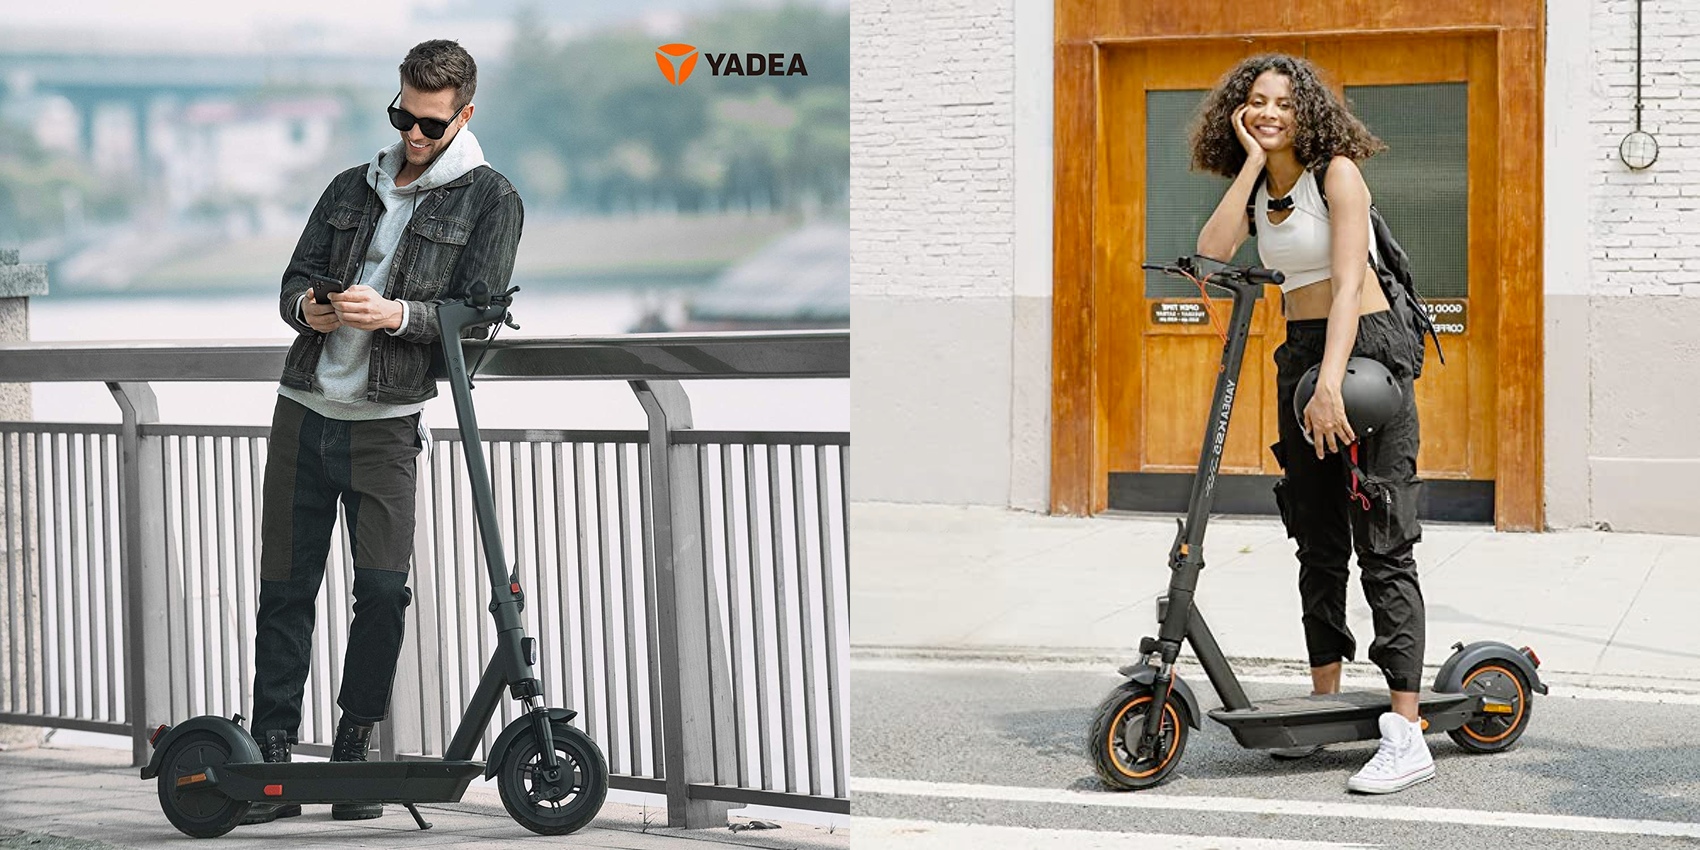 Electric scooter giant Yadea launches 37-mile KS5 Pro standing e-scooter